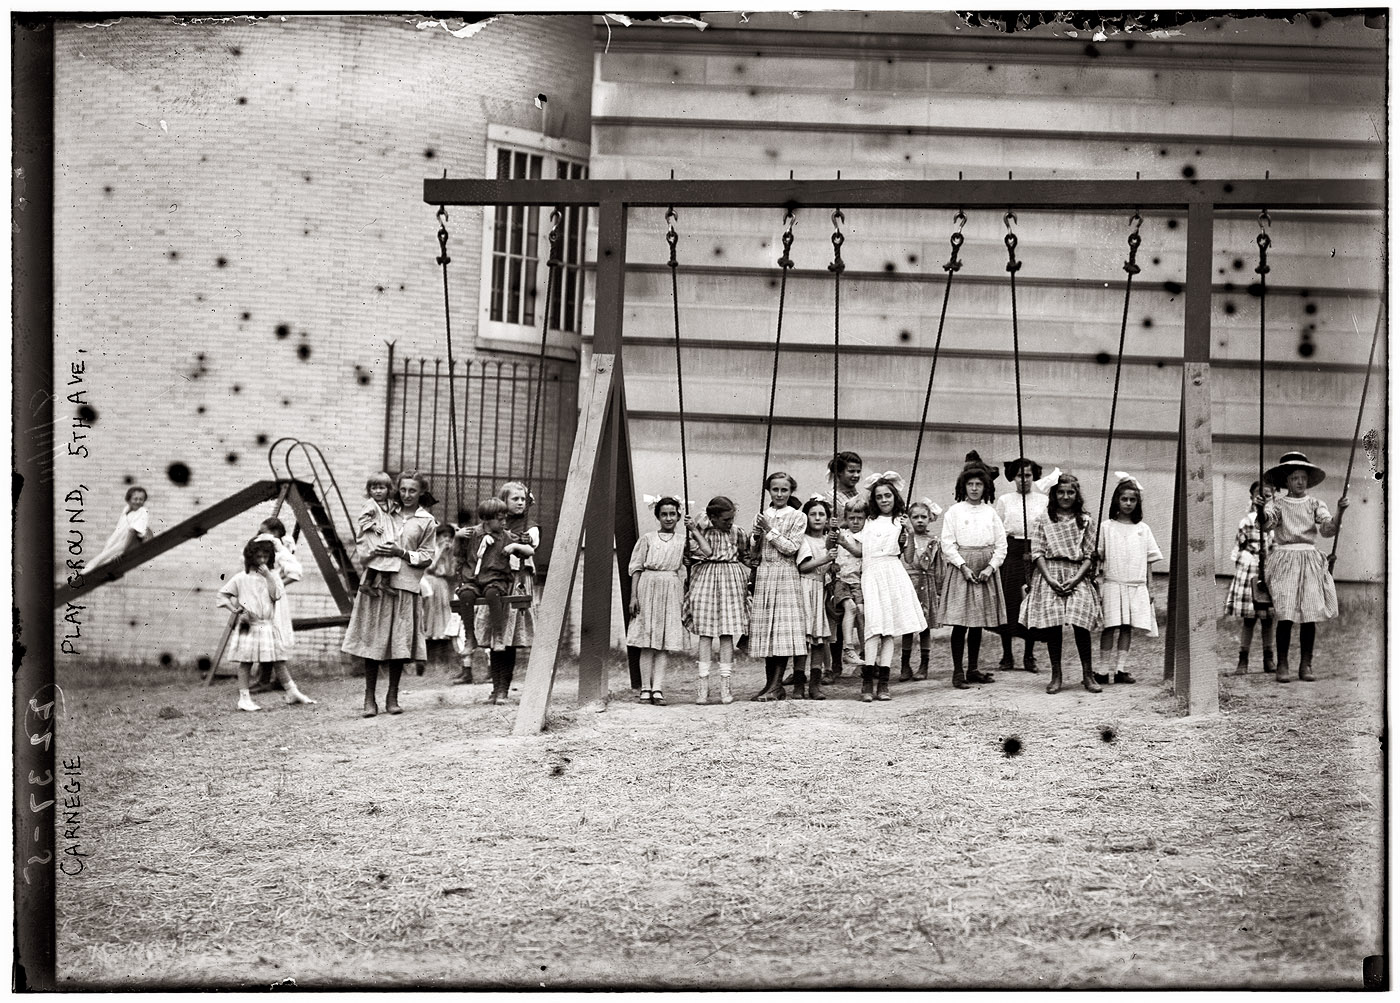 Carnegie Playground, Fifth Avenue, New York. Circa 1910. View full size. 5x7 glass negative, George Grantham Bain Collection, Library of Congress.